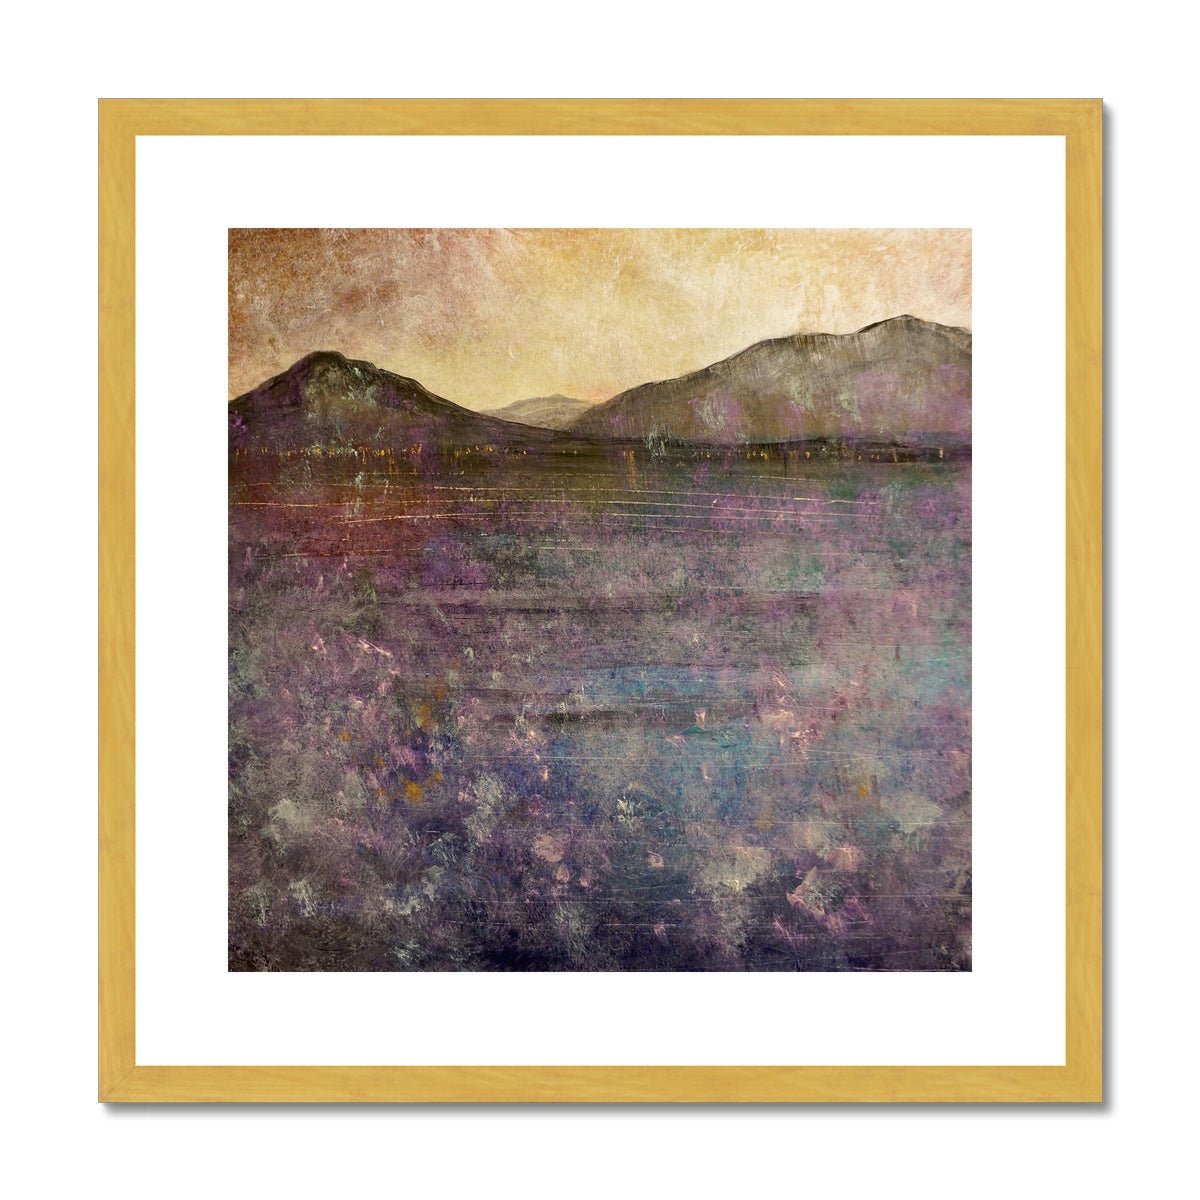 River Clyde Winter Dusk Painting | Antique Framed & Mounted Prints From Scotland-Antique Framed & Mounted Prints-River Clyde Art Gallery-20"x20"-Gold Frame-Paintings, Prints, Homeware, Art Gifts From Scotland By Scottish Artist Kevin Hunter